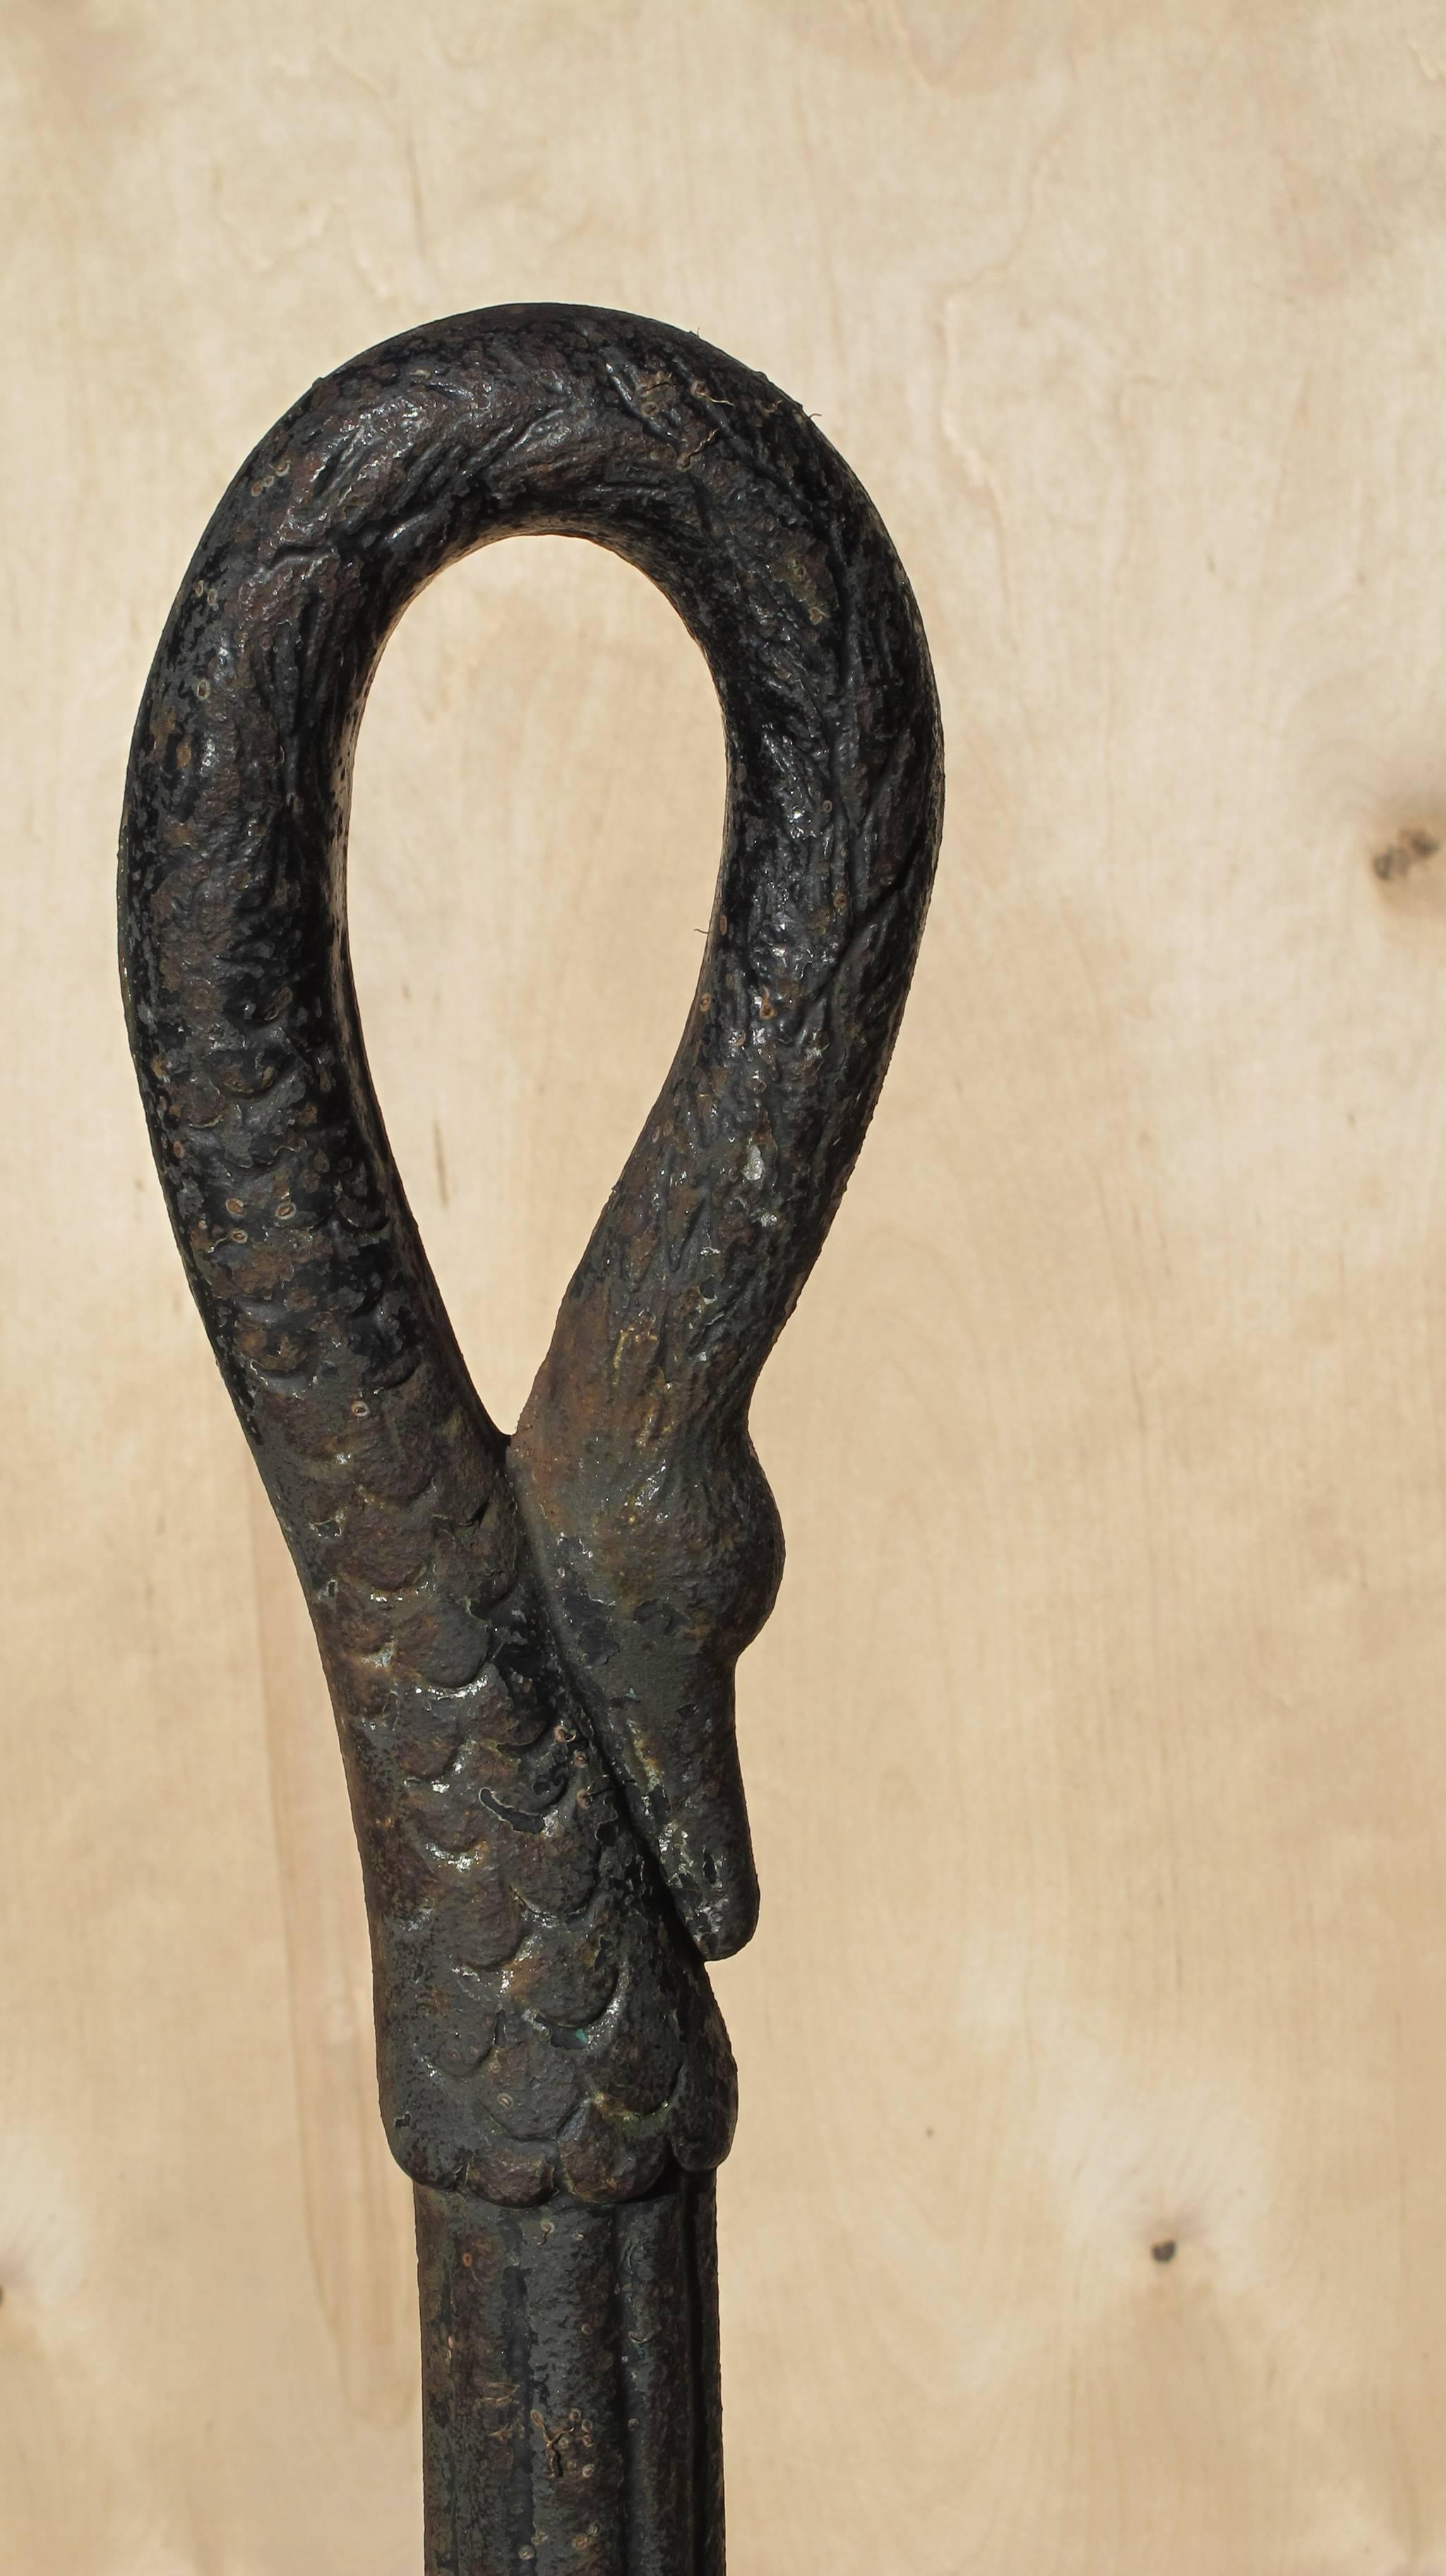 Elegant form in this 19th century hitching post to tie up horses. The artistry of this swan's neck includes striations of feather lines and details to the head. The lower shaft is grooved with rhythmic rings and nice aged surface with old paint.